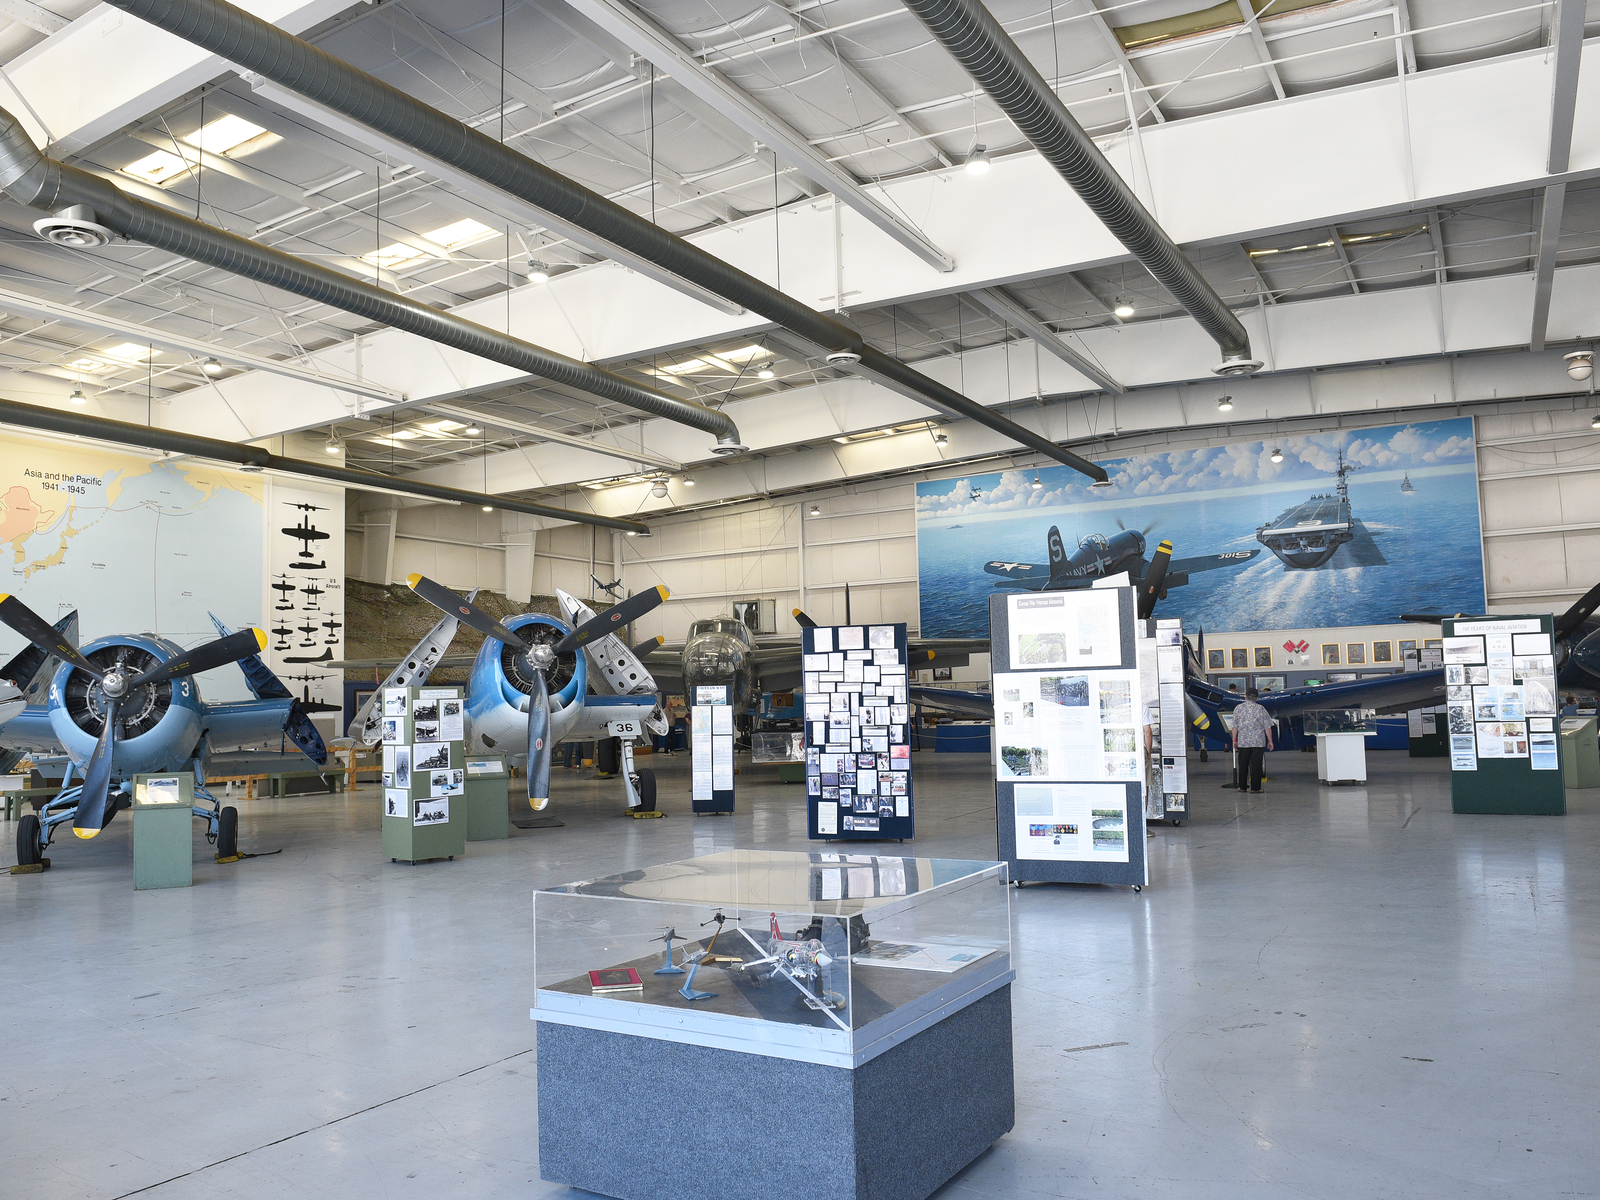 Hangar at Palm Springs Air Museum, one of the best things to do in Palm Springs, exhibits vintage planes and infographics about planes